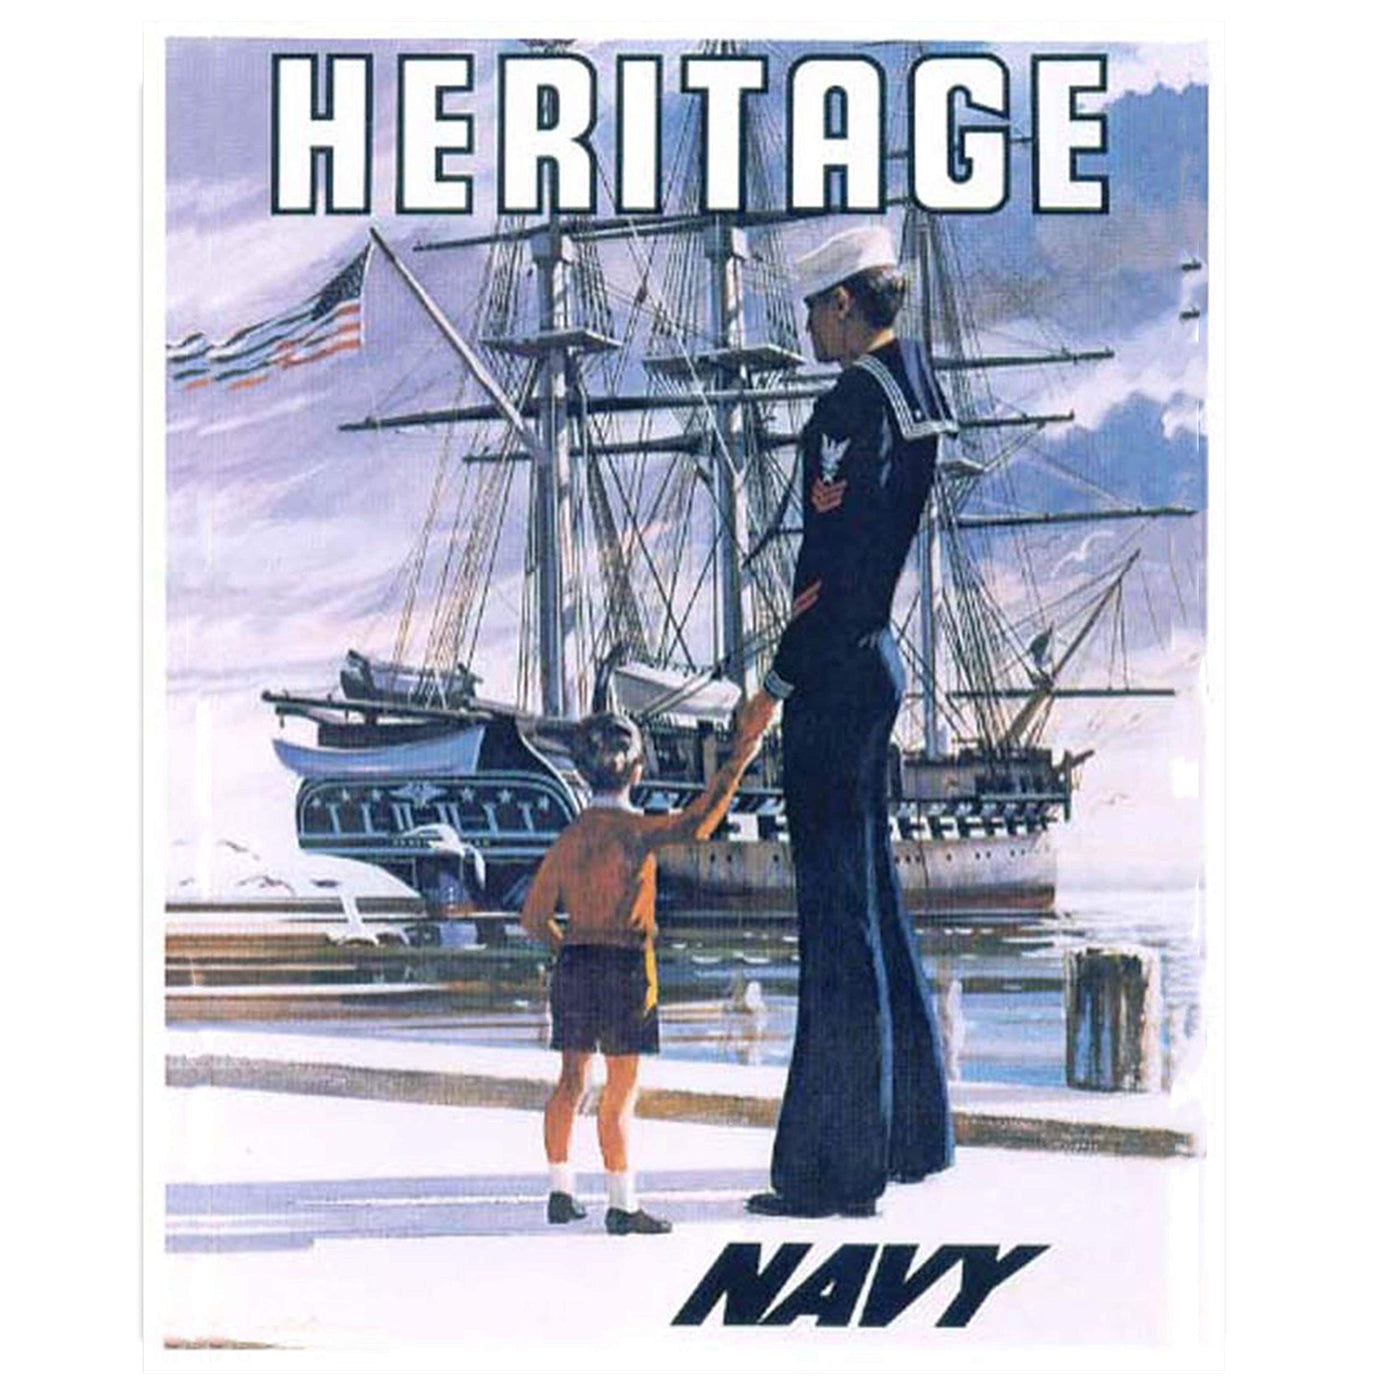 Vintage Navy Recruitment Poster Set-"Pride-Heritage-Adventure"(3)- 8 x 10"s Wall Art Prints- Ready To Frame- WWII Retro Navy Slogans-Replica Poster Prints. Home-Office Decor. Historical Military Decor